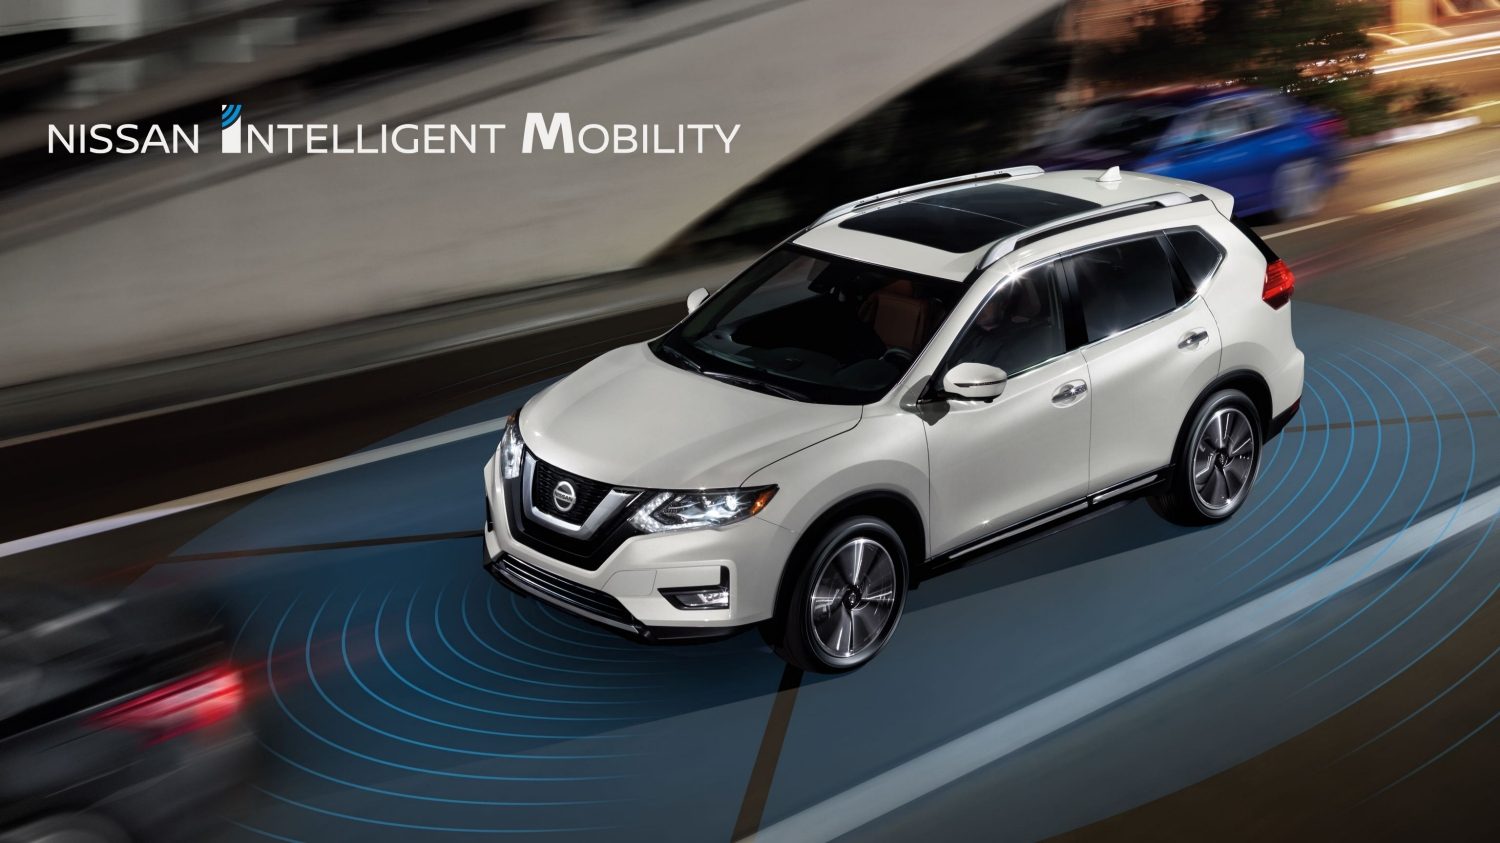 A white Nissan with Intelligent Mobility technology